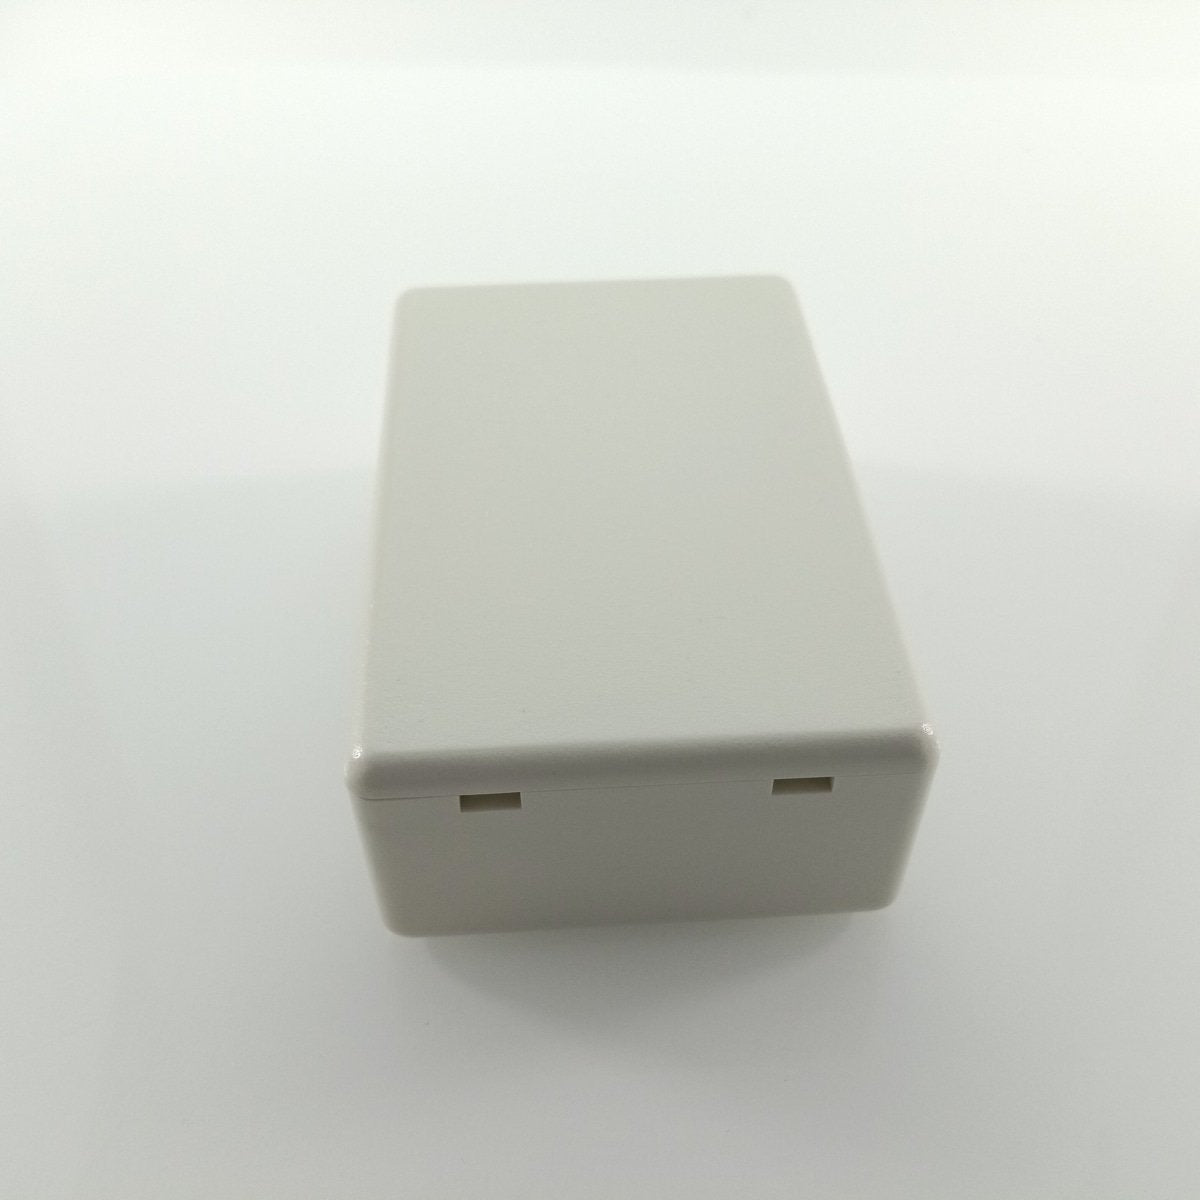 1pcs Electronic Project Case Box Enclosure Junction Box 50/55/70/80/90mm Length - 80x50x26mm - - Asia Sell